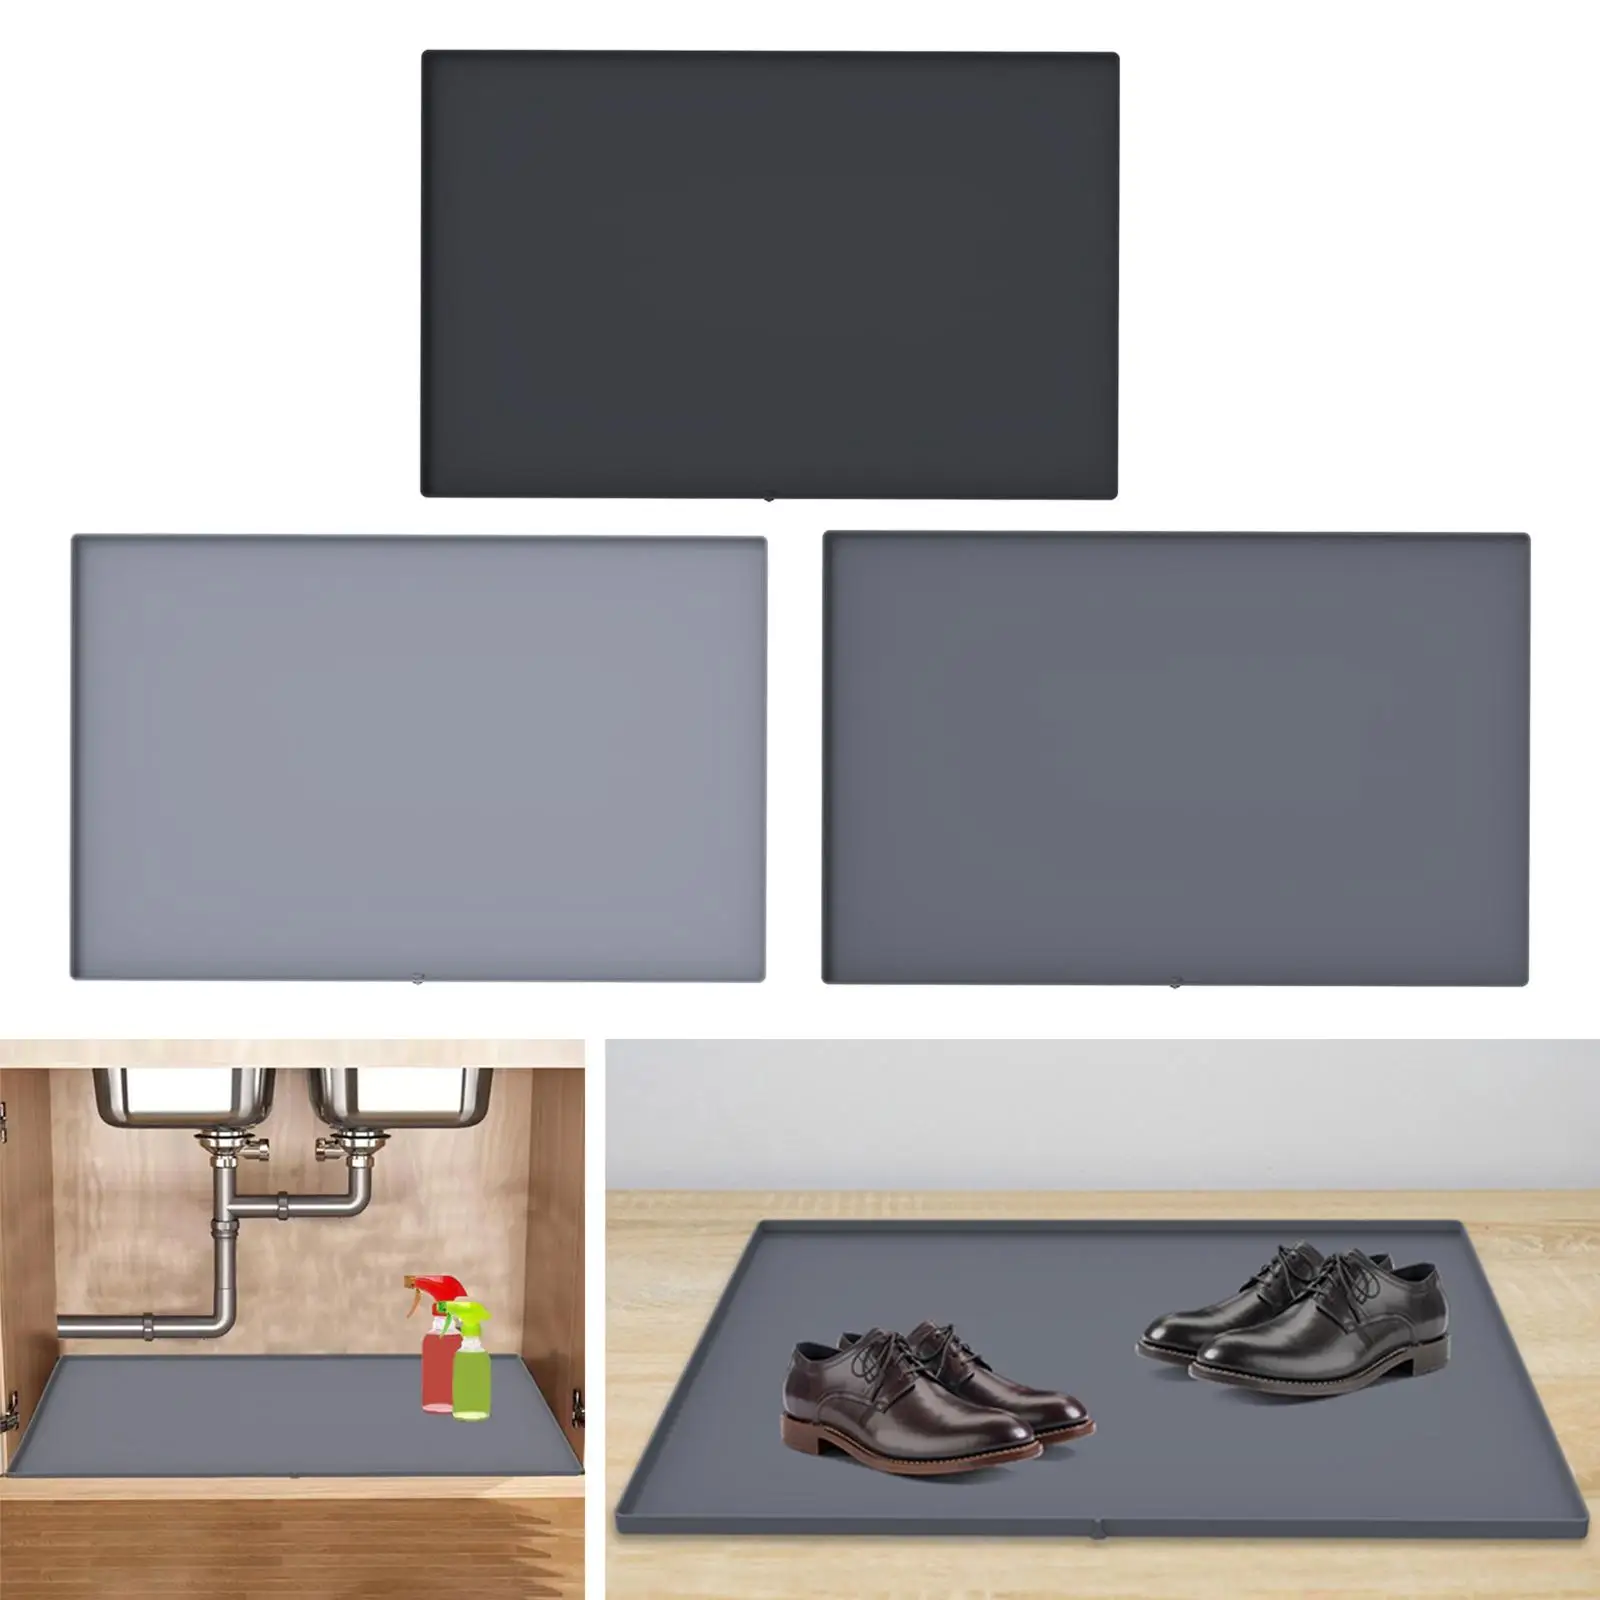 Mat Heat Resistant Oilproof Waterproof Silicone Mat Leakproof Durable Sink Cabinet Protector Mats for Kitchen Bathroom